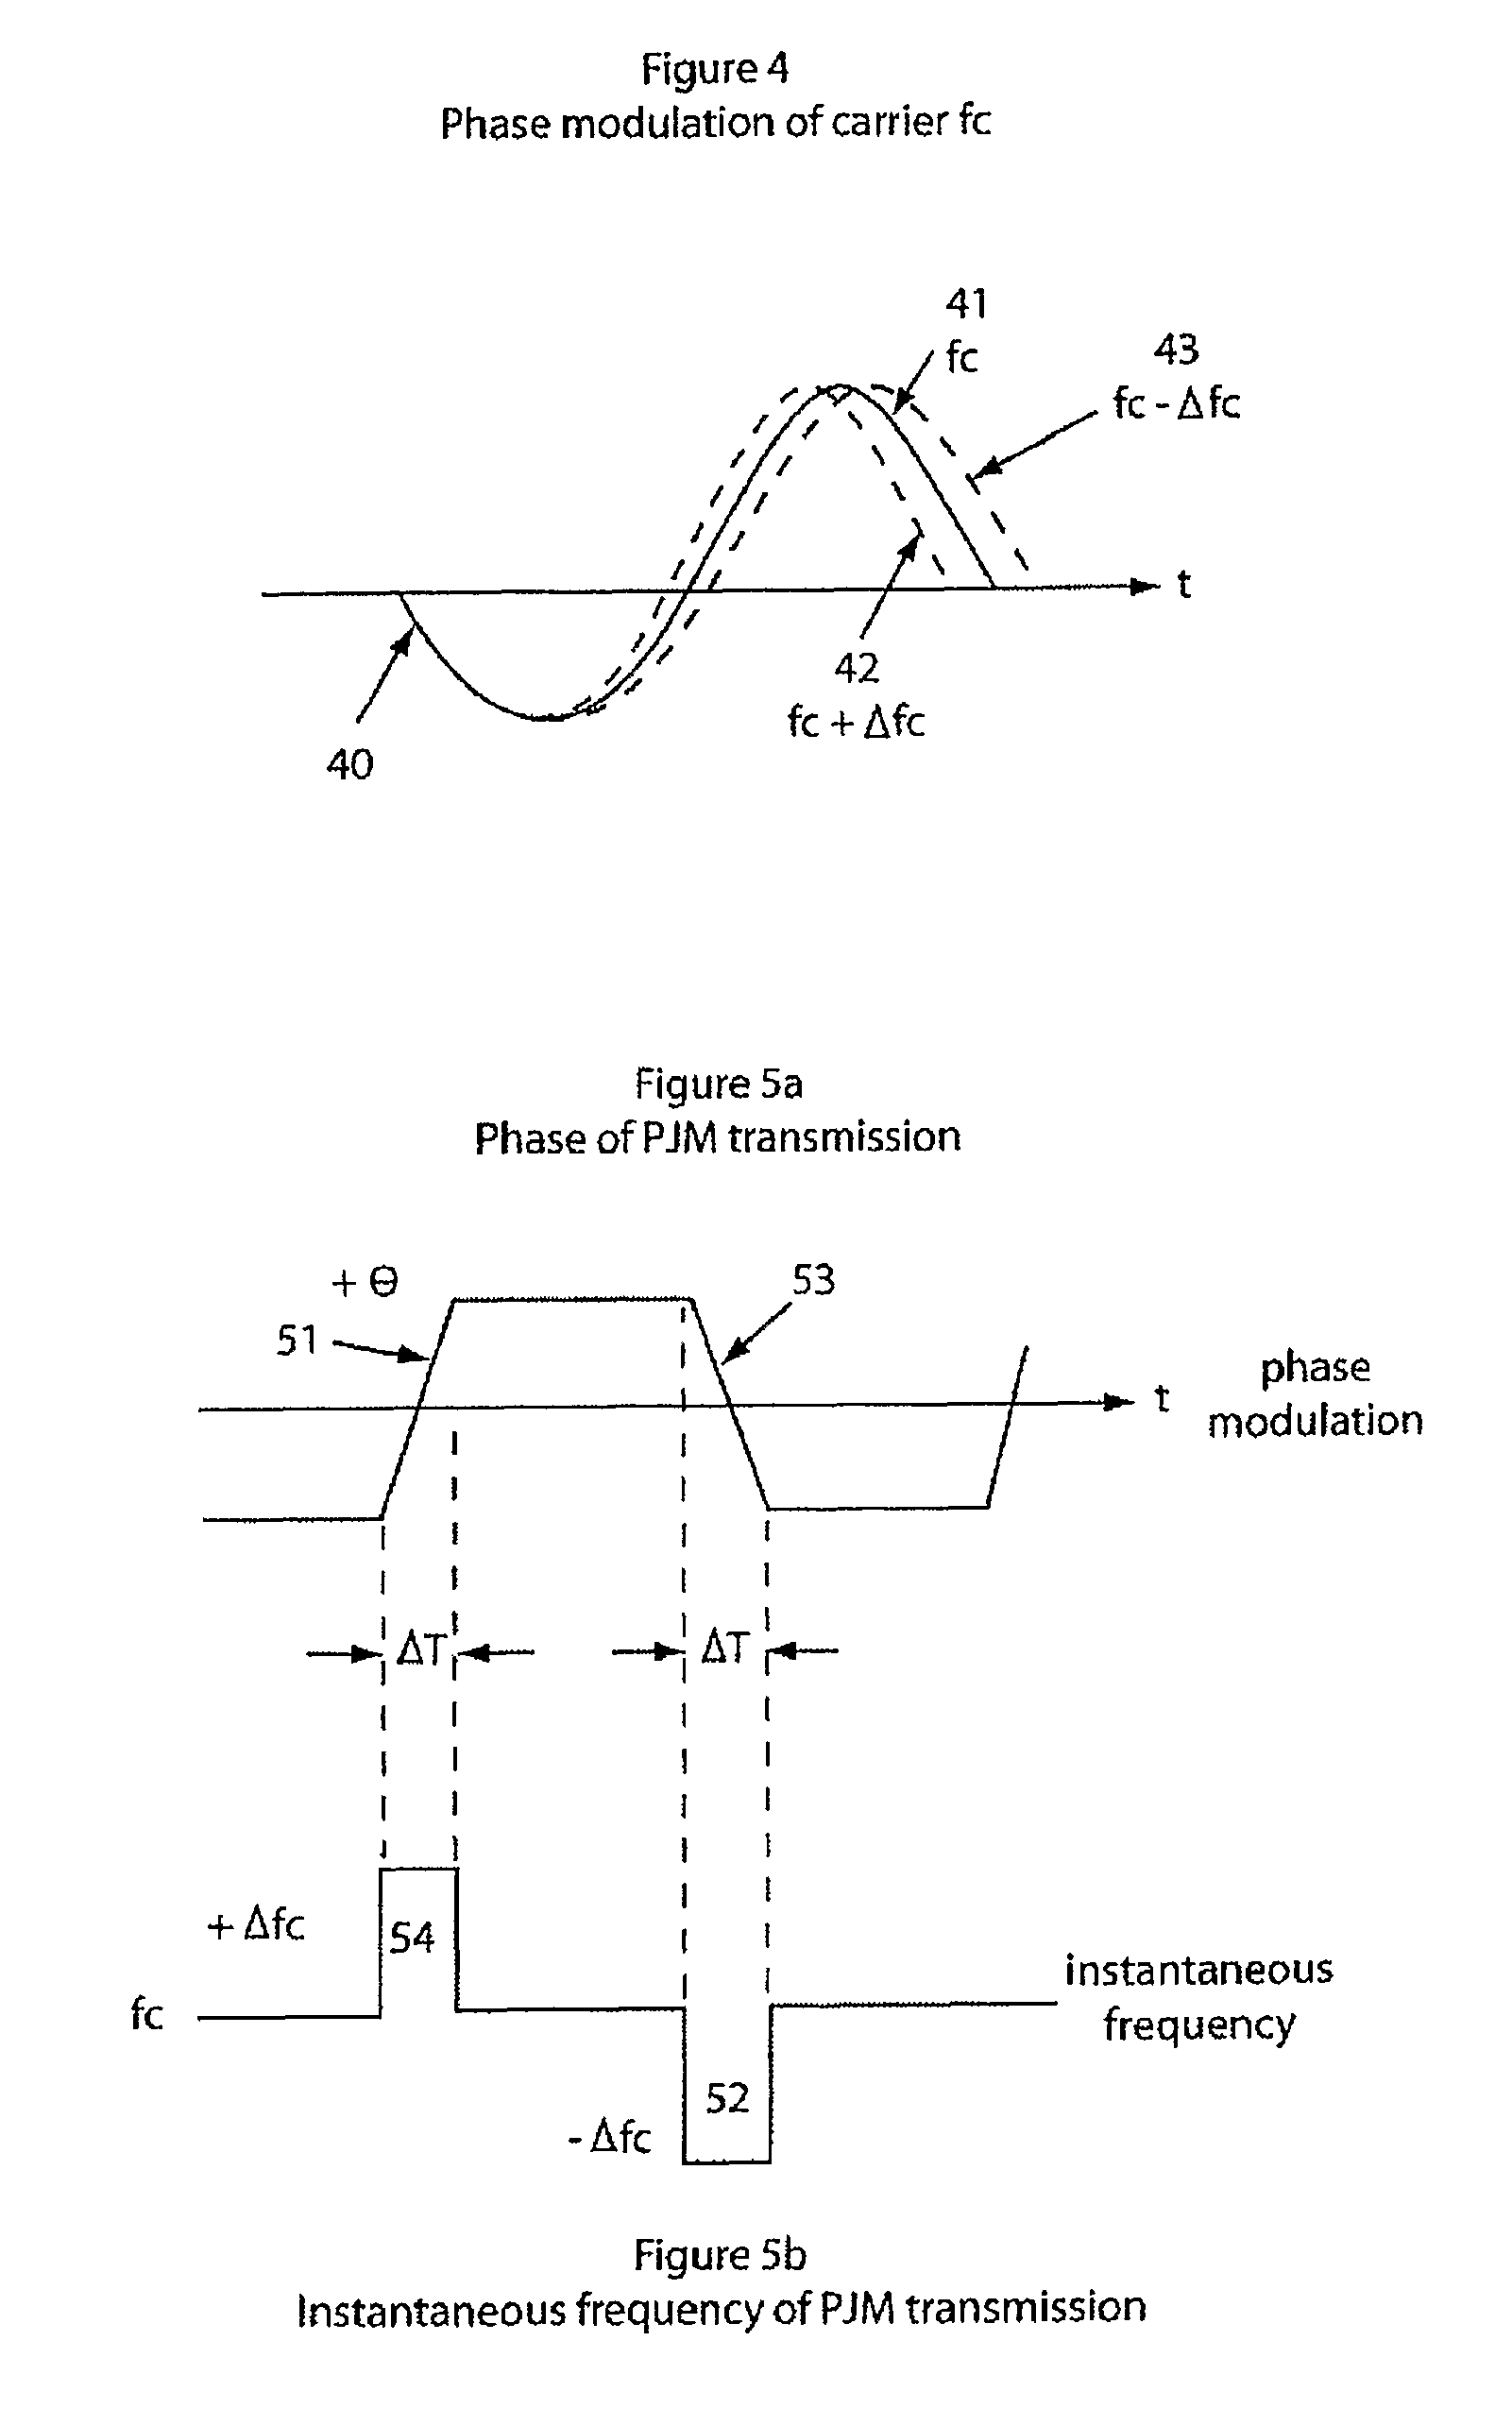 Method and apparatus adapted to transmit data